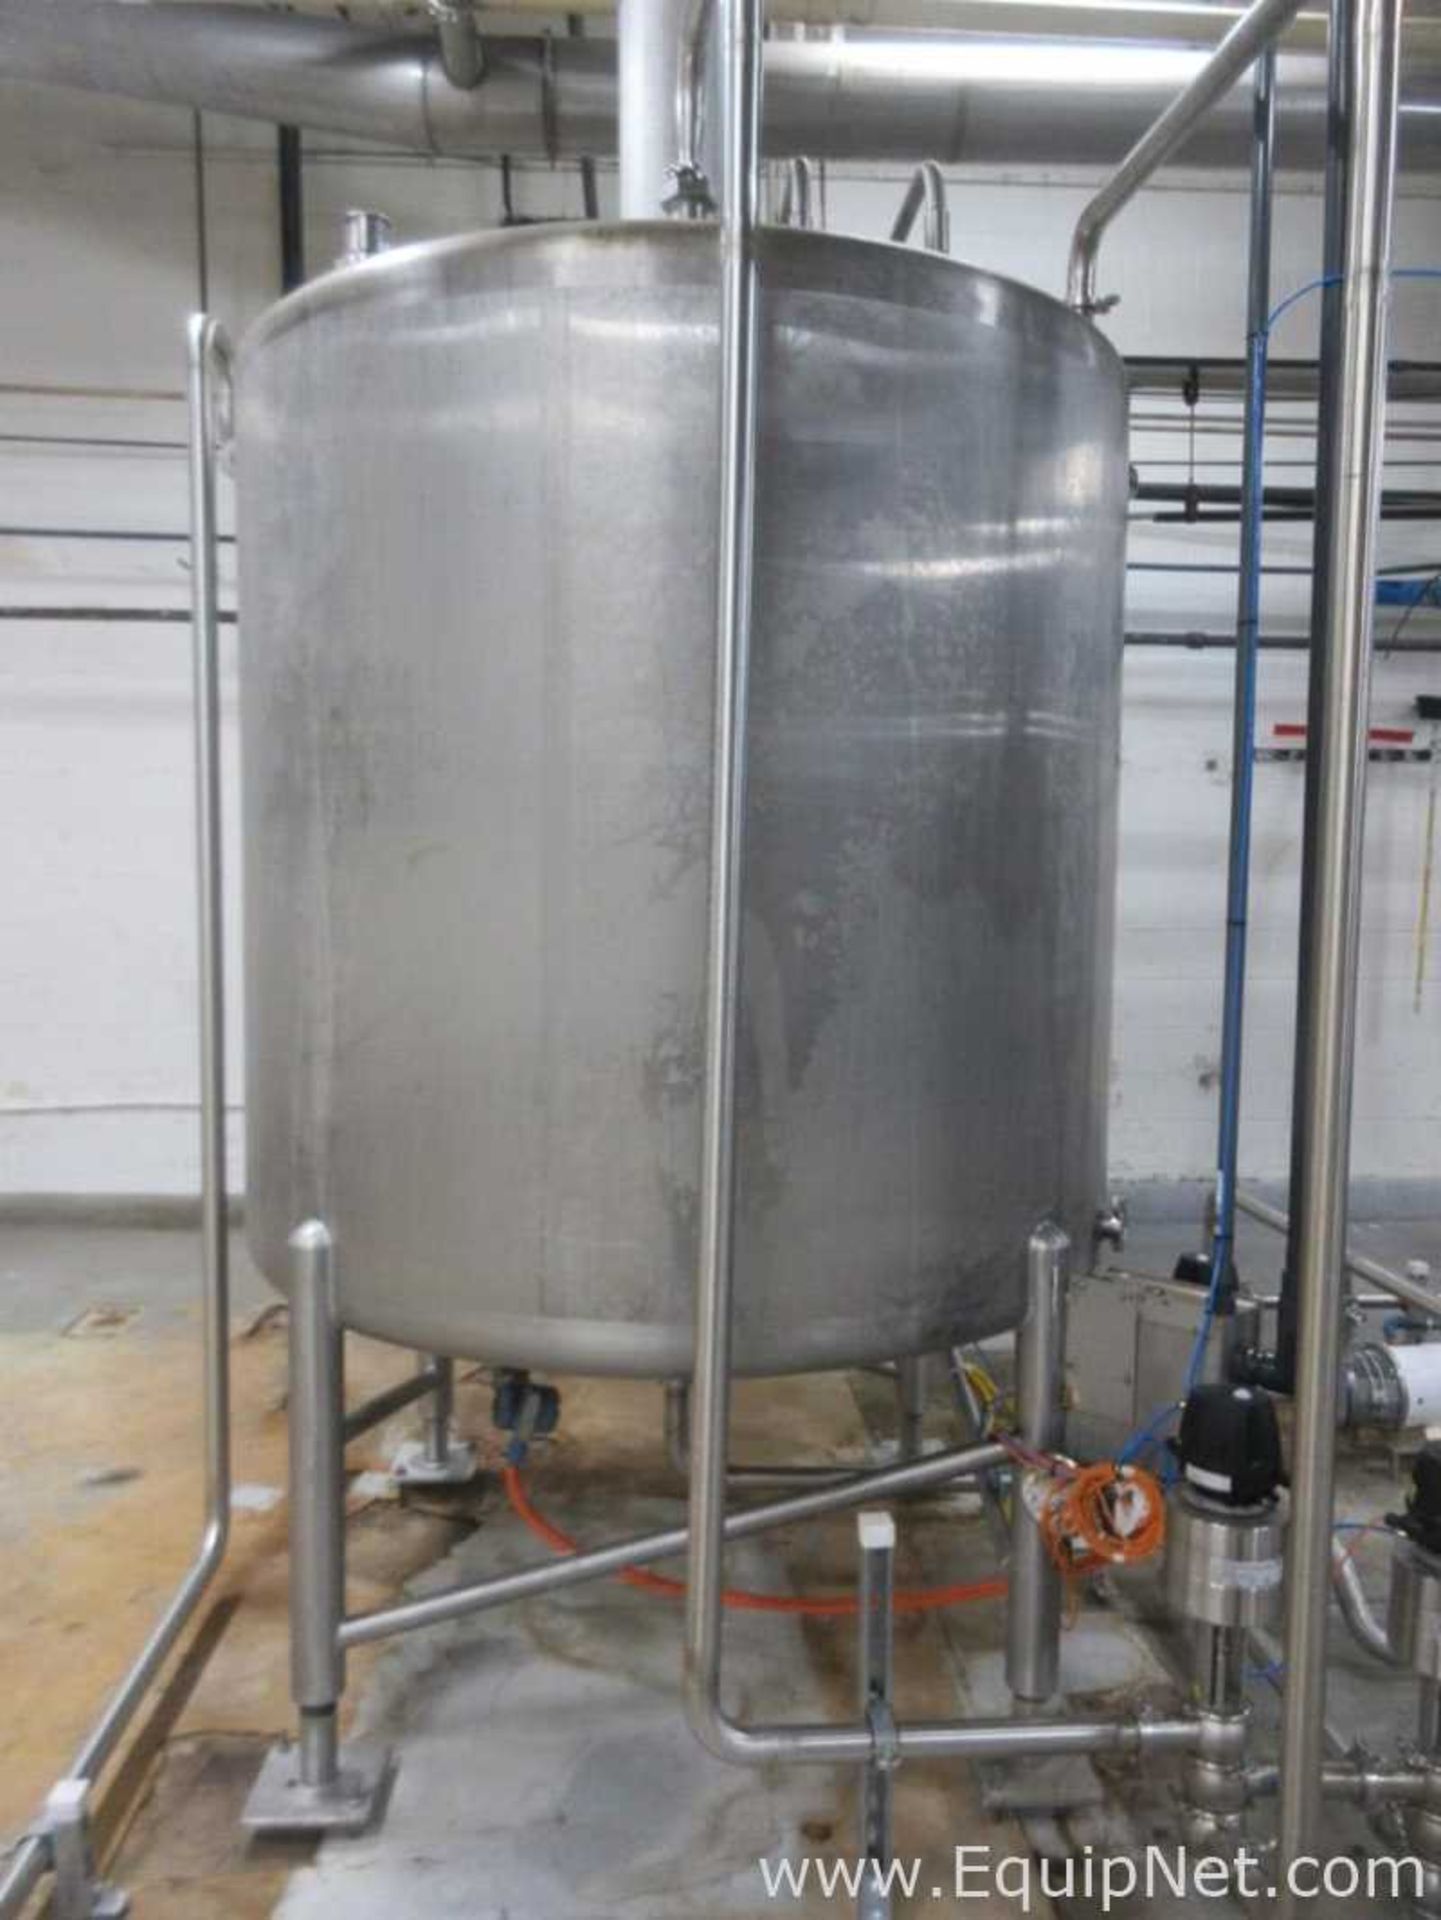 750 Gallon Cherry Burrell Stainless Steel Tank - Image 4 of 7